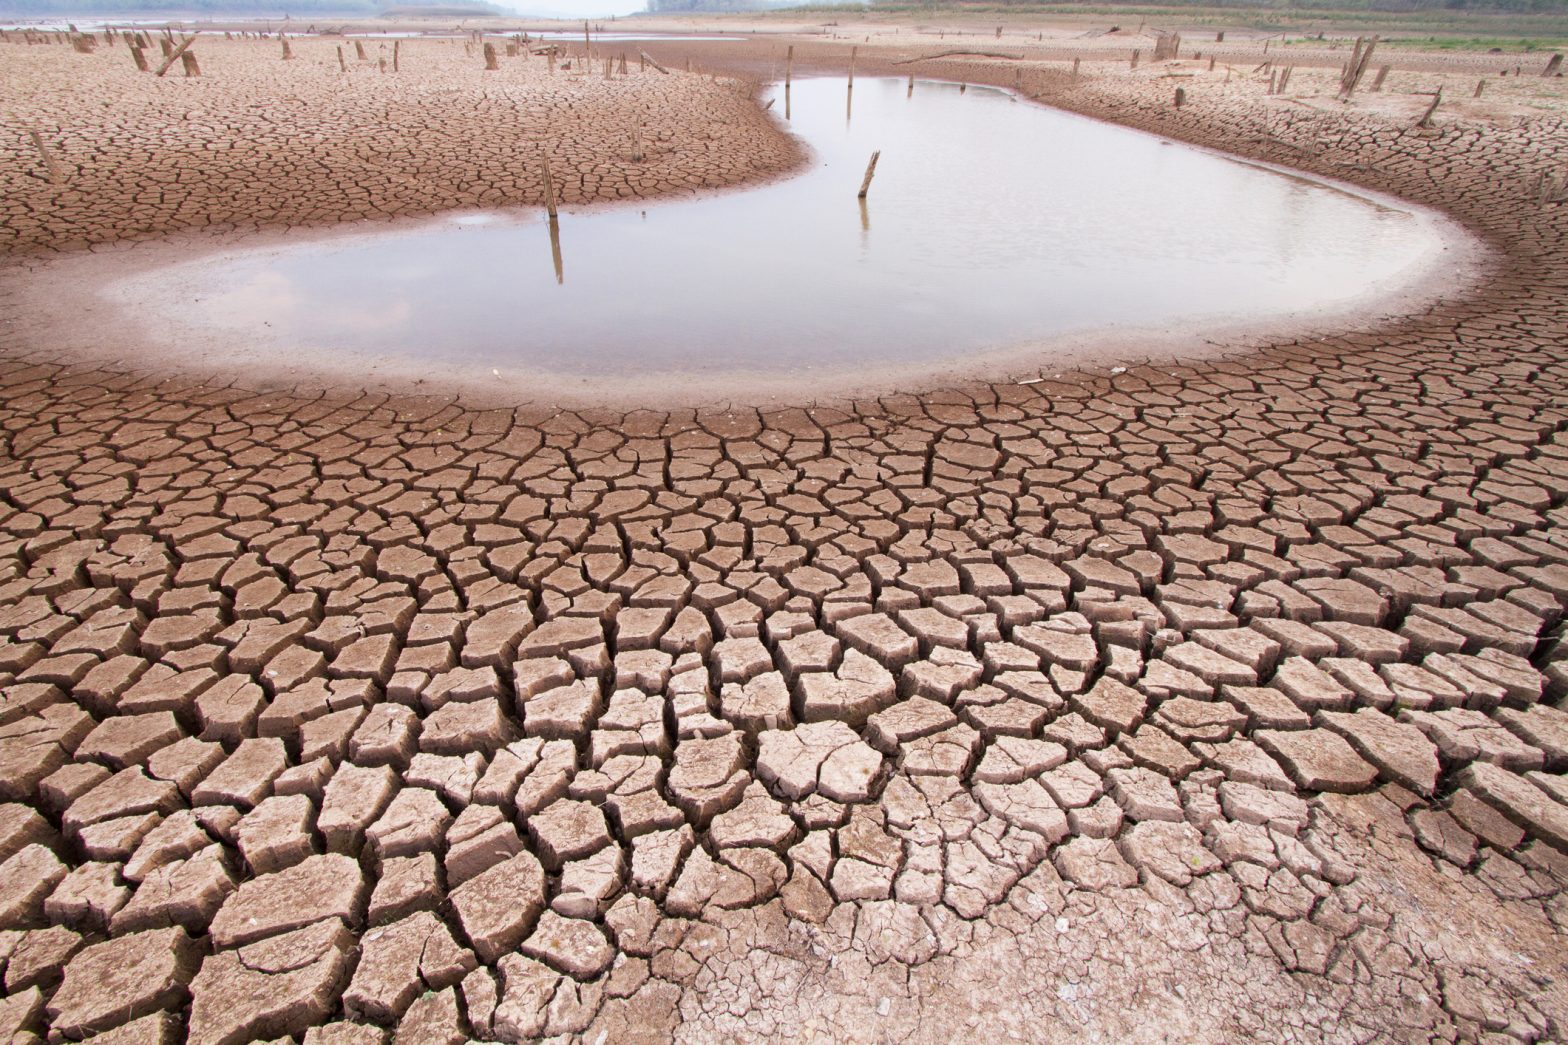 Climate Change and Excessive Water Use Linked to Significant Drying of World’s Lakes